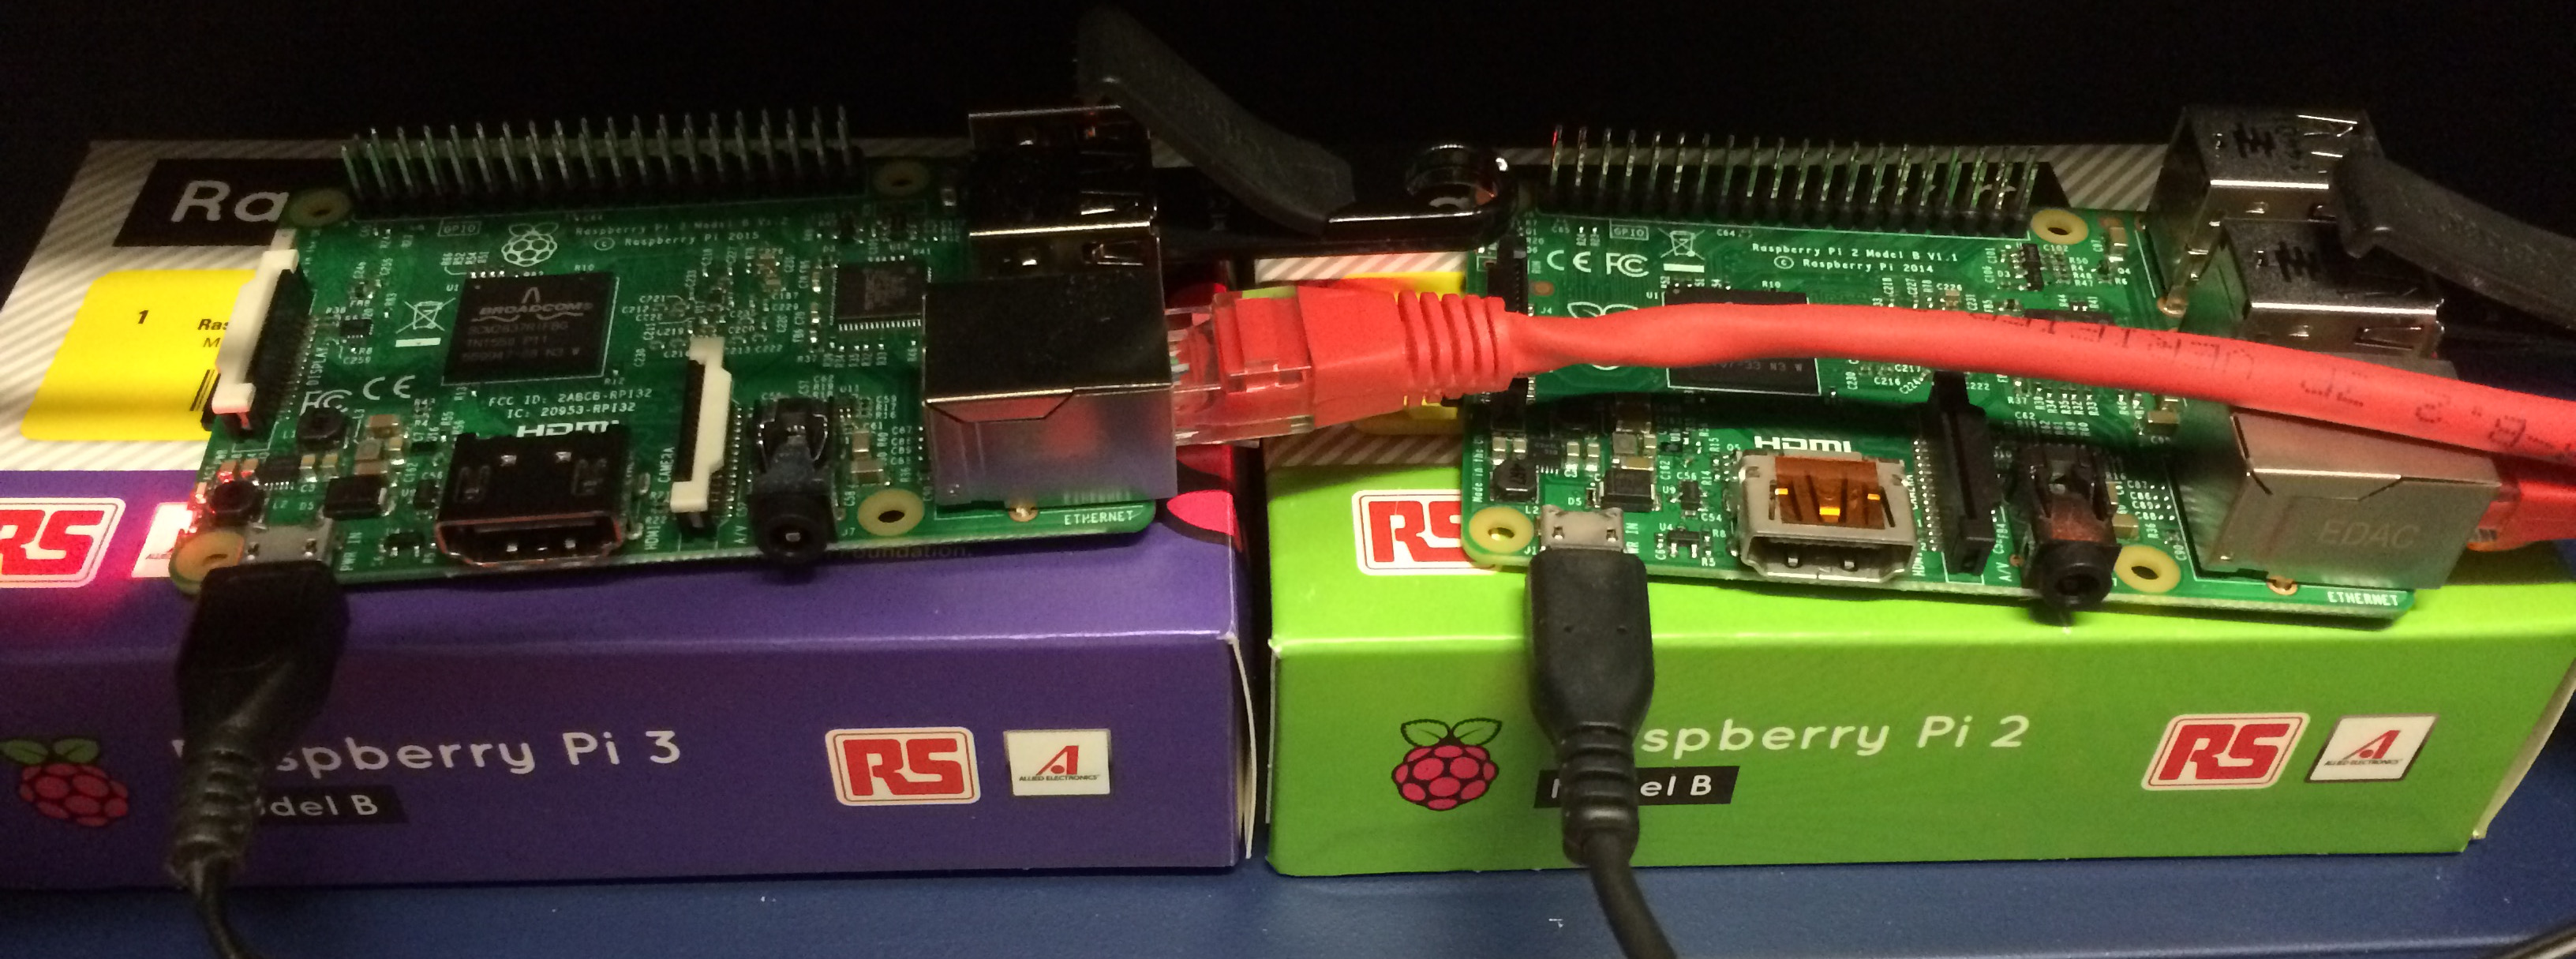 Serving the Raspberry Pi 3 launch from a Raspberry Pi 3 ...